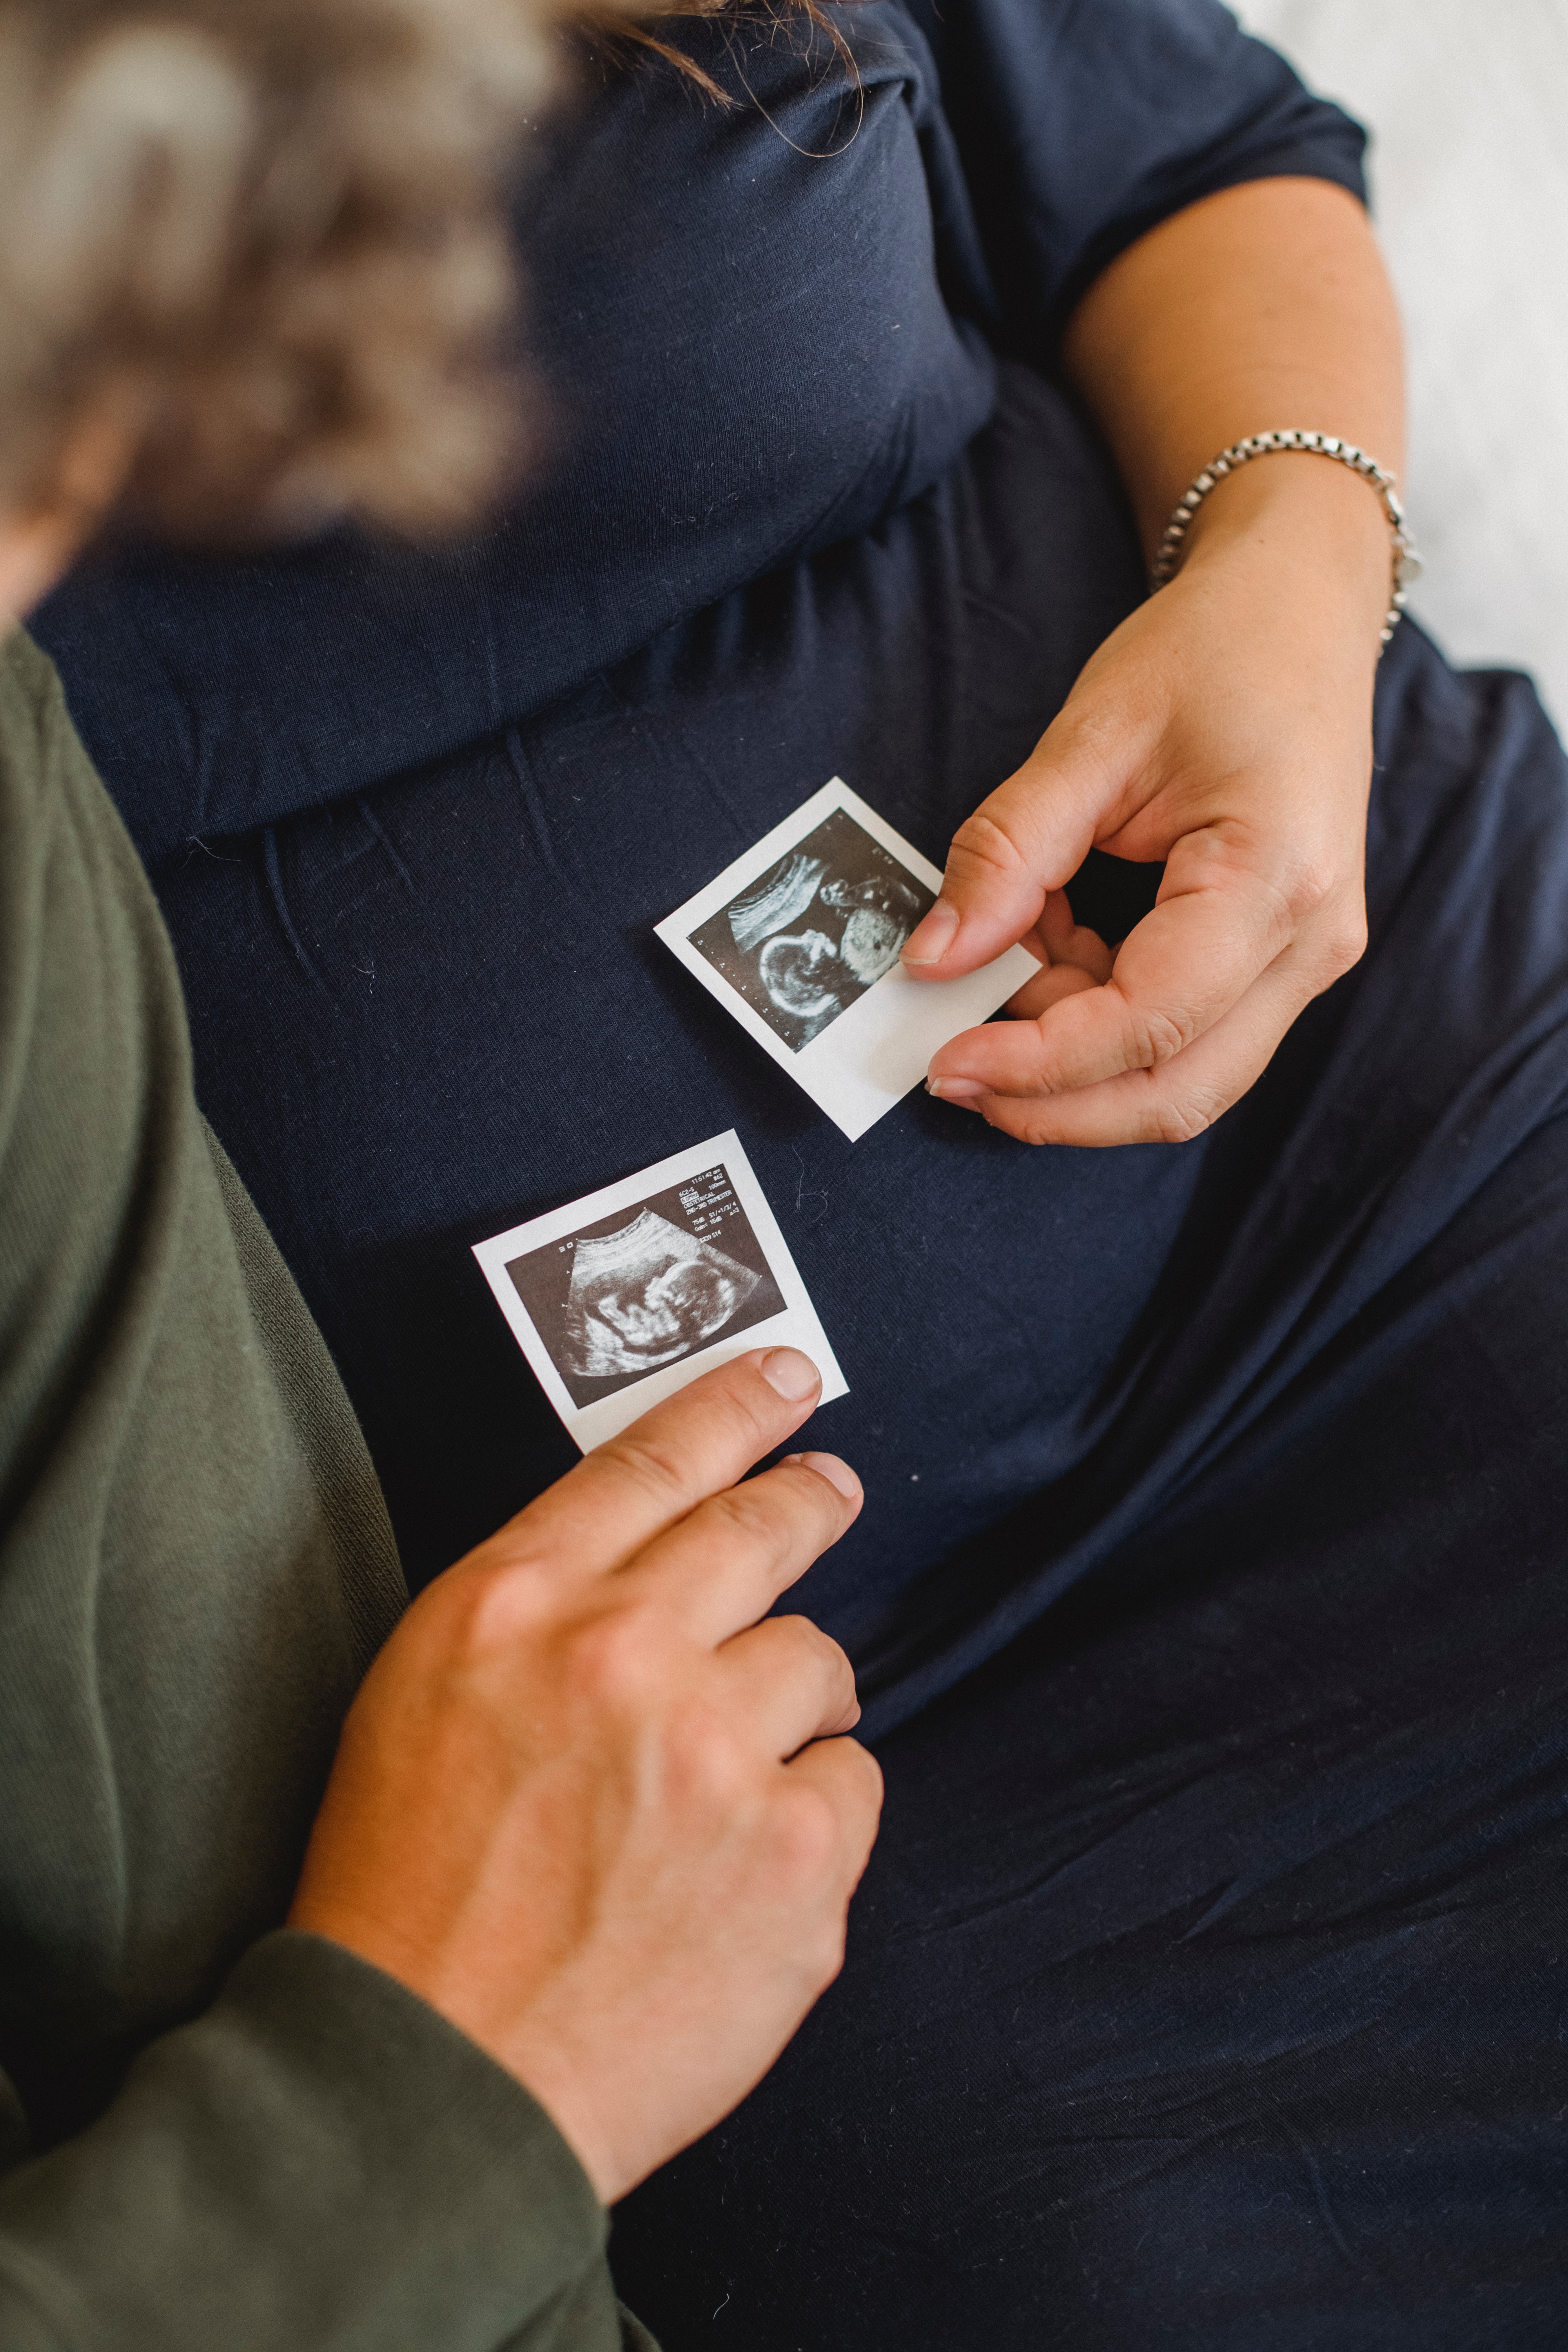 Her friend congratulated her on her pregnancy. | Source: Pexels